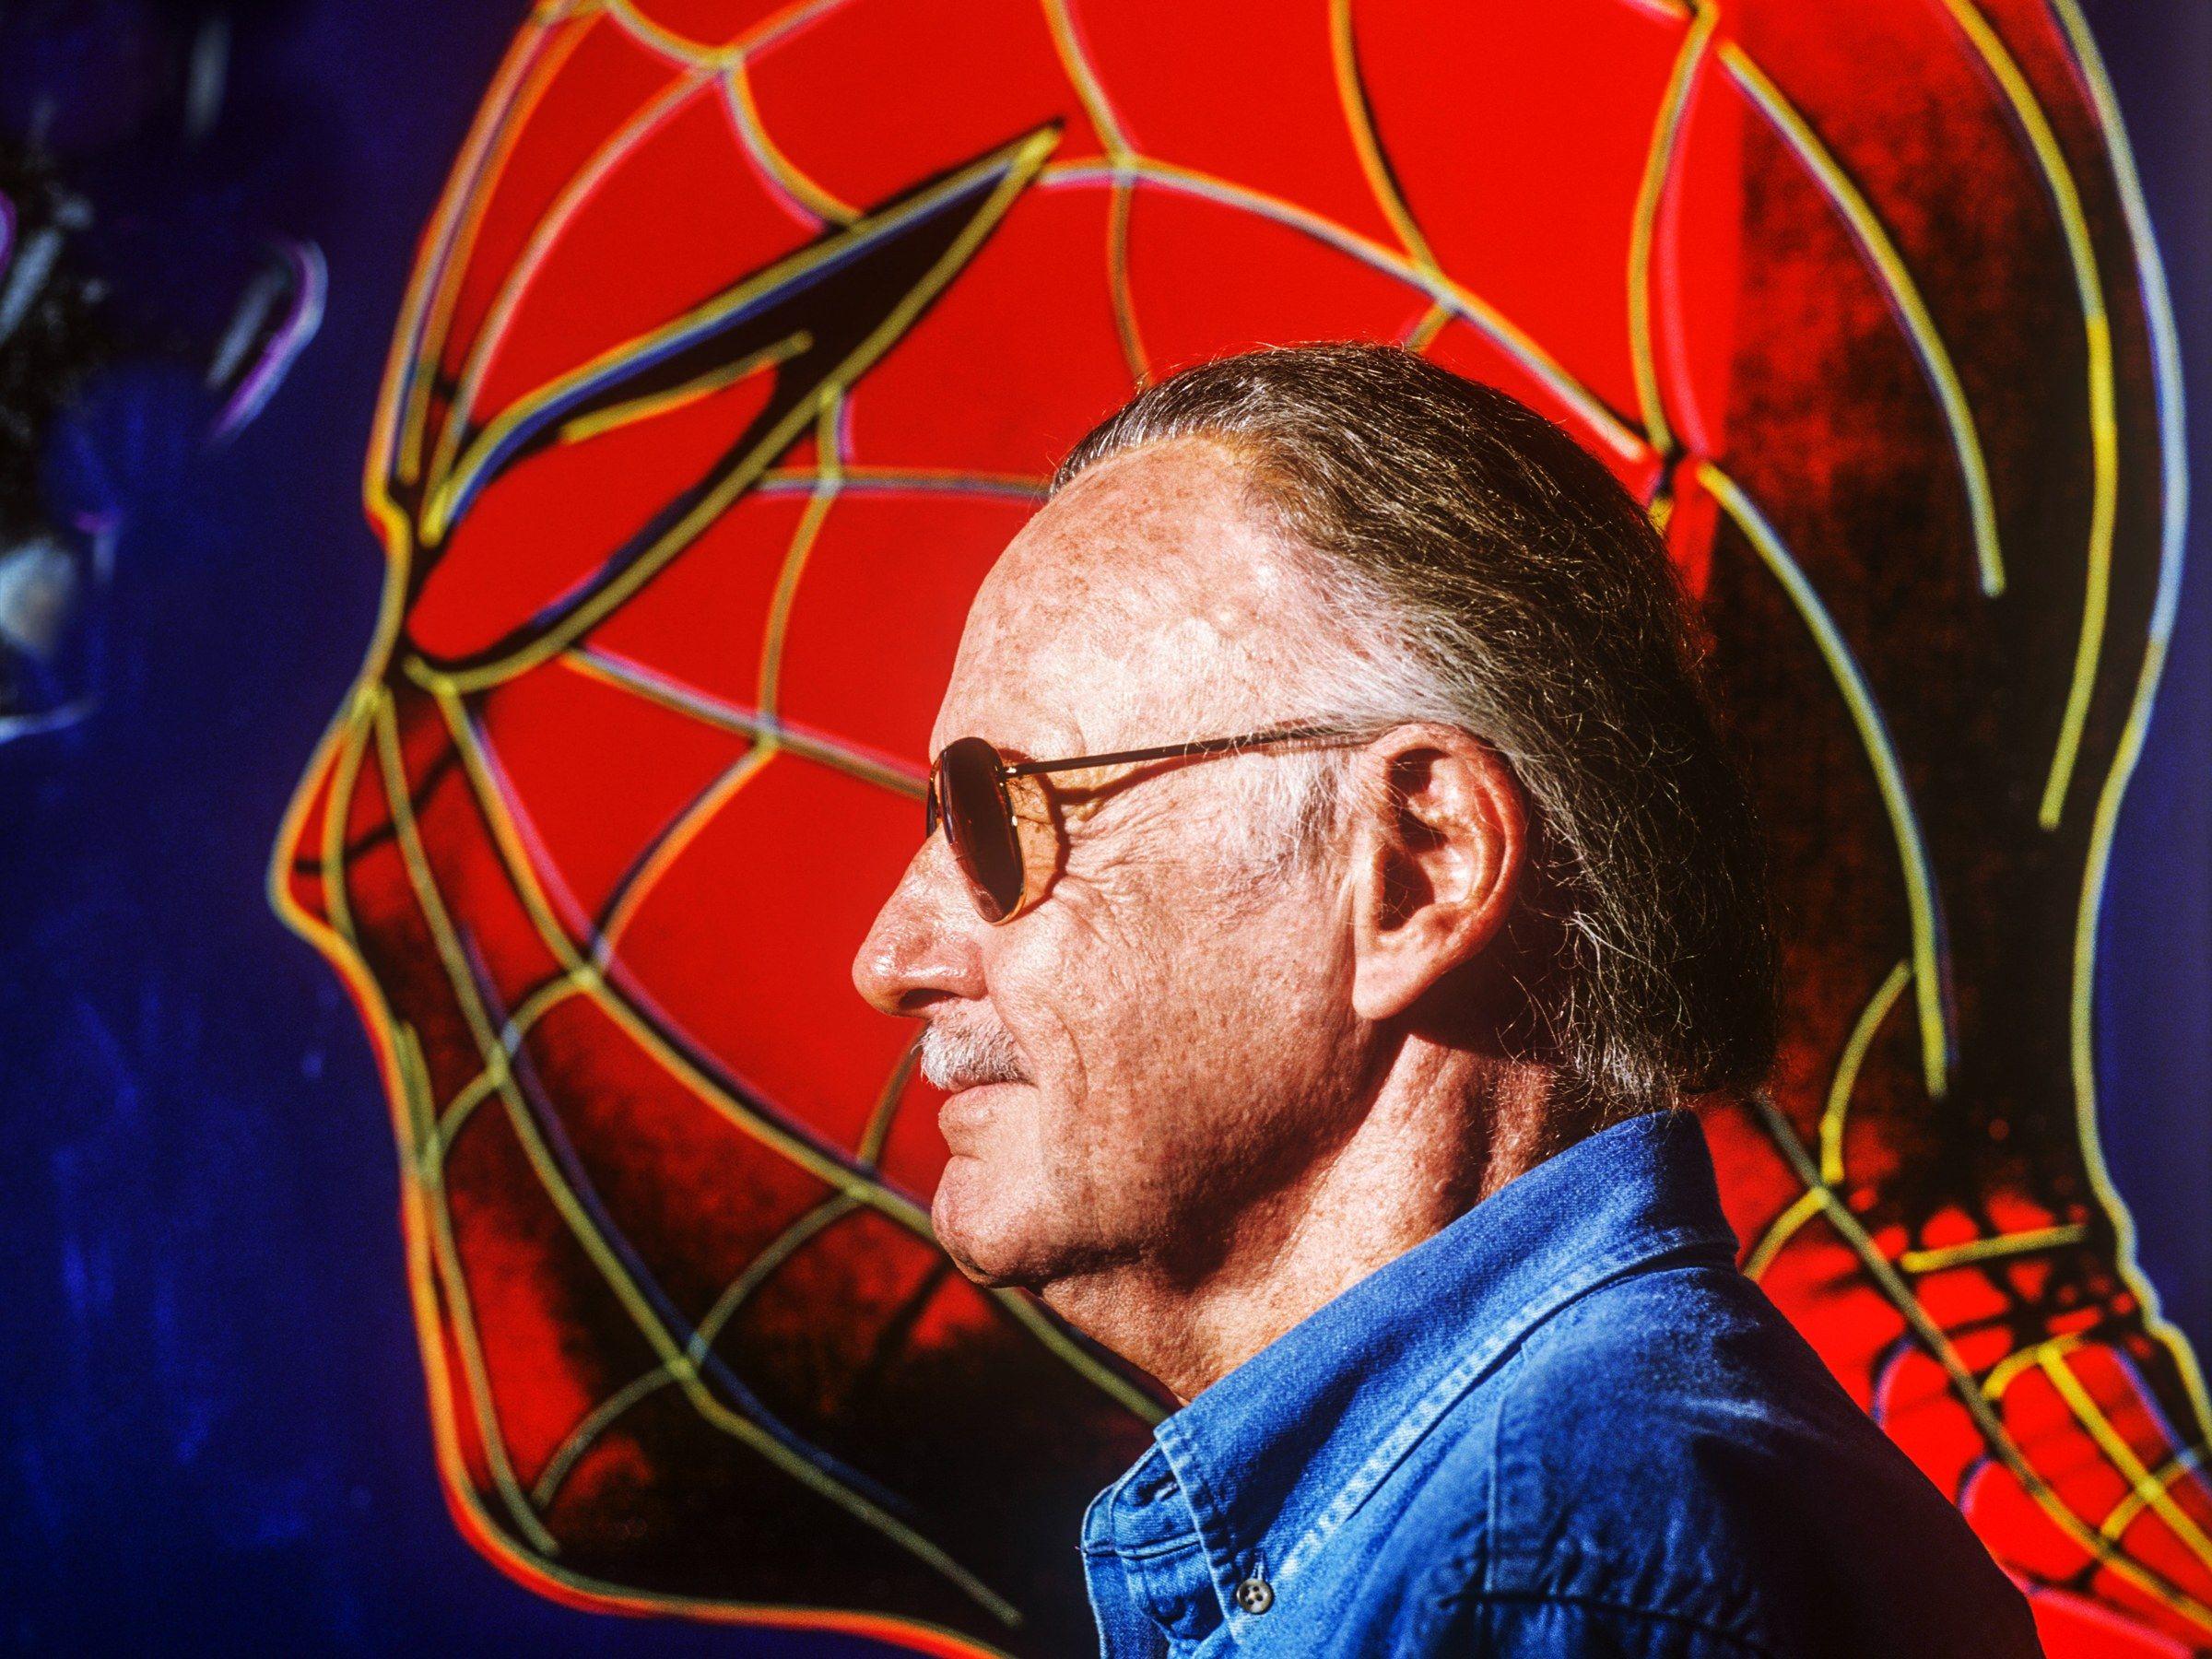 Stan Lee Marvel Logo - The Best of Stan Lee's Marvel Comic Books | WIRED